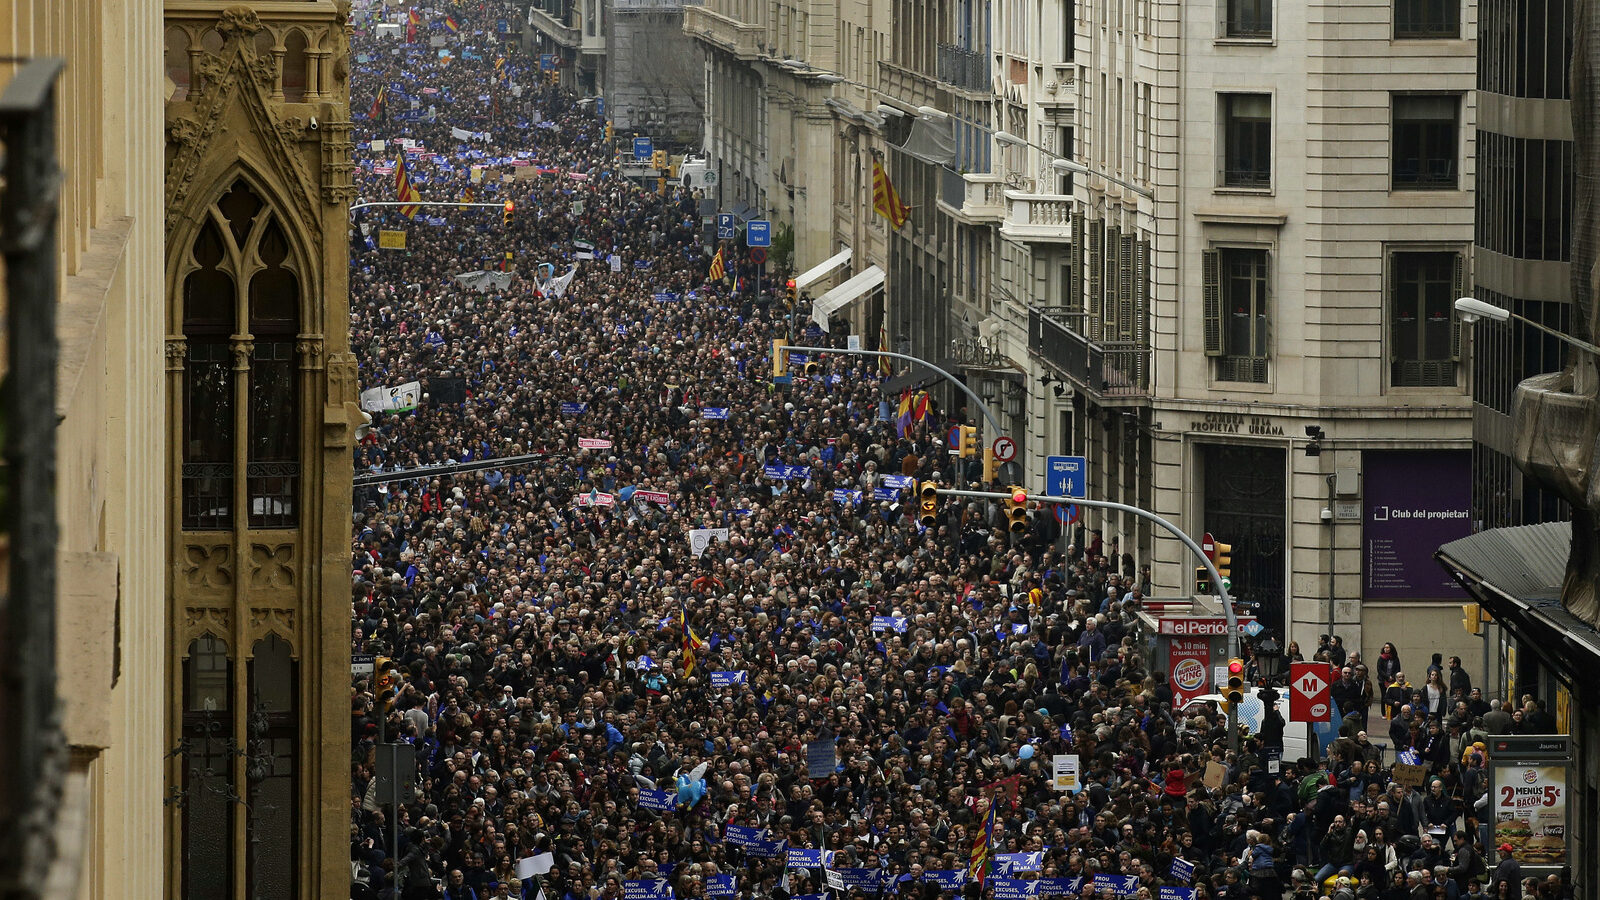 Thousands of people march to demand Spain's government to increase its efforts to take in refugees who have fled the war in Syria and other violent conflicts in Barcelona, Spain, Saturday, Feb. 18, 2017. Spain has taken in just 1,100 refugees of the over 17,000 it has pledged to accept. Banner reads in Catalan: "Enough Excuses! Take Them In Now!". (AP/Manu Fernandez)